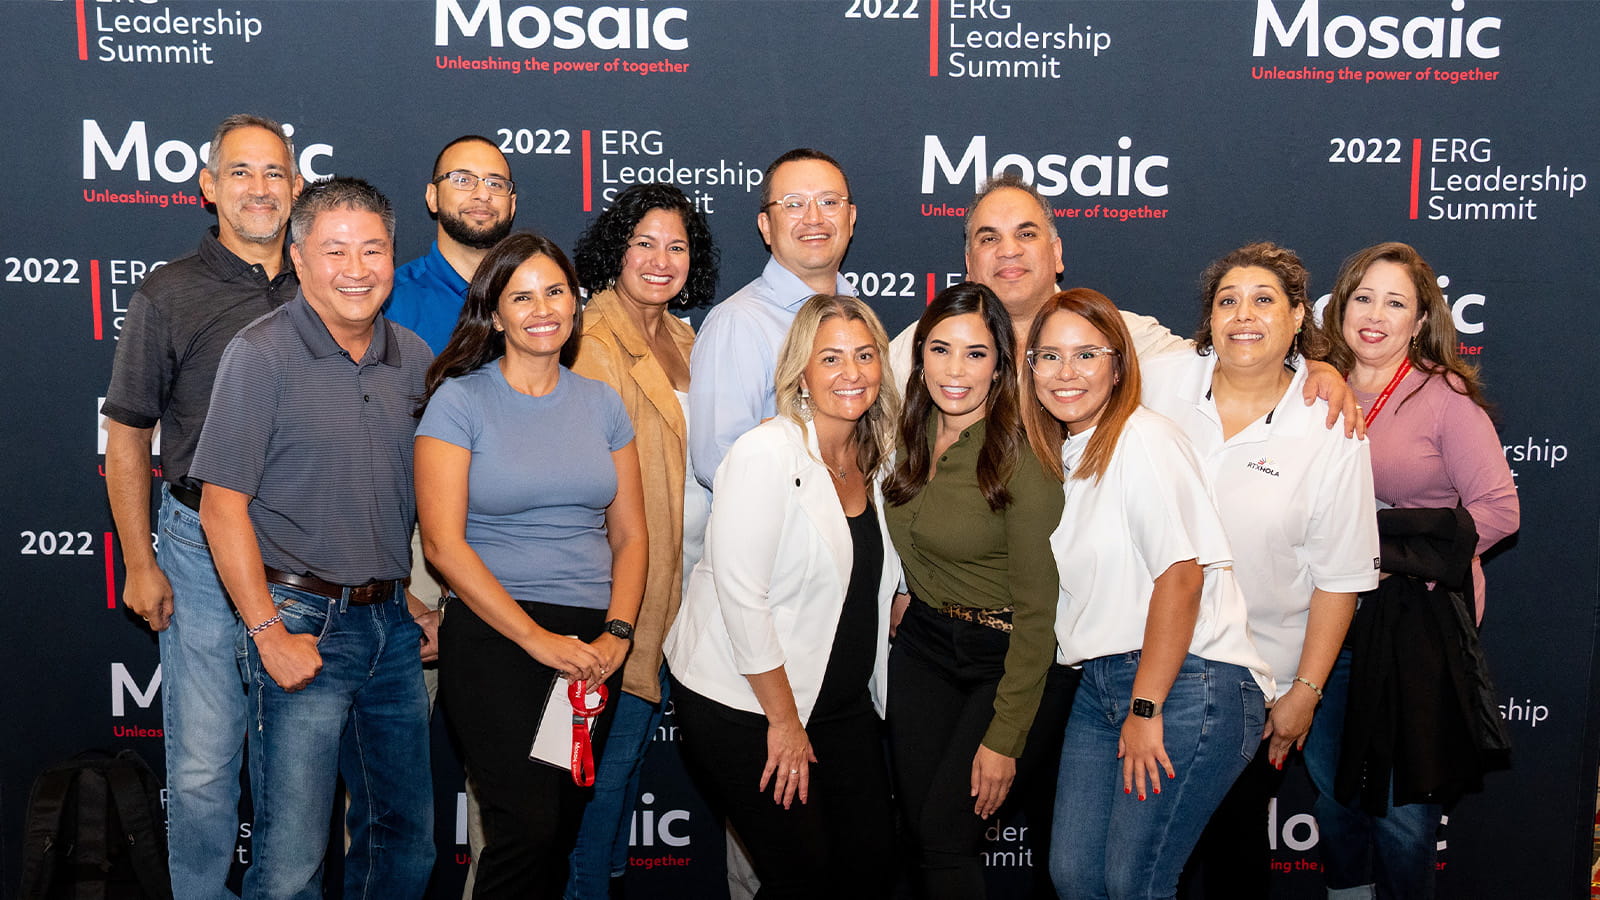 Seven women and five men wearing casual and business-casual clothing smile and pose for a group photo against a dark blue backdrop that reads: Mosaic: Unleashing the power of together, 2022 ERG Leadership Summit